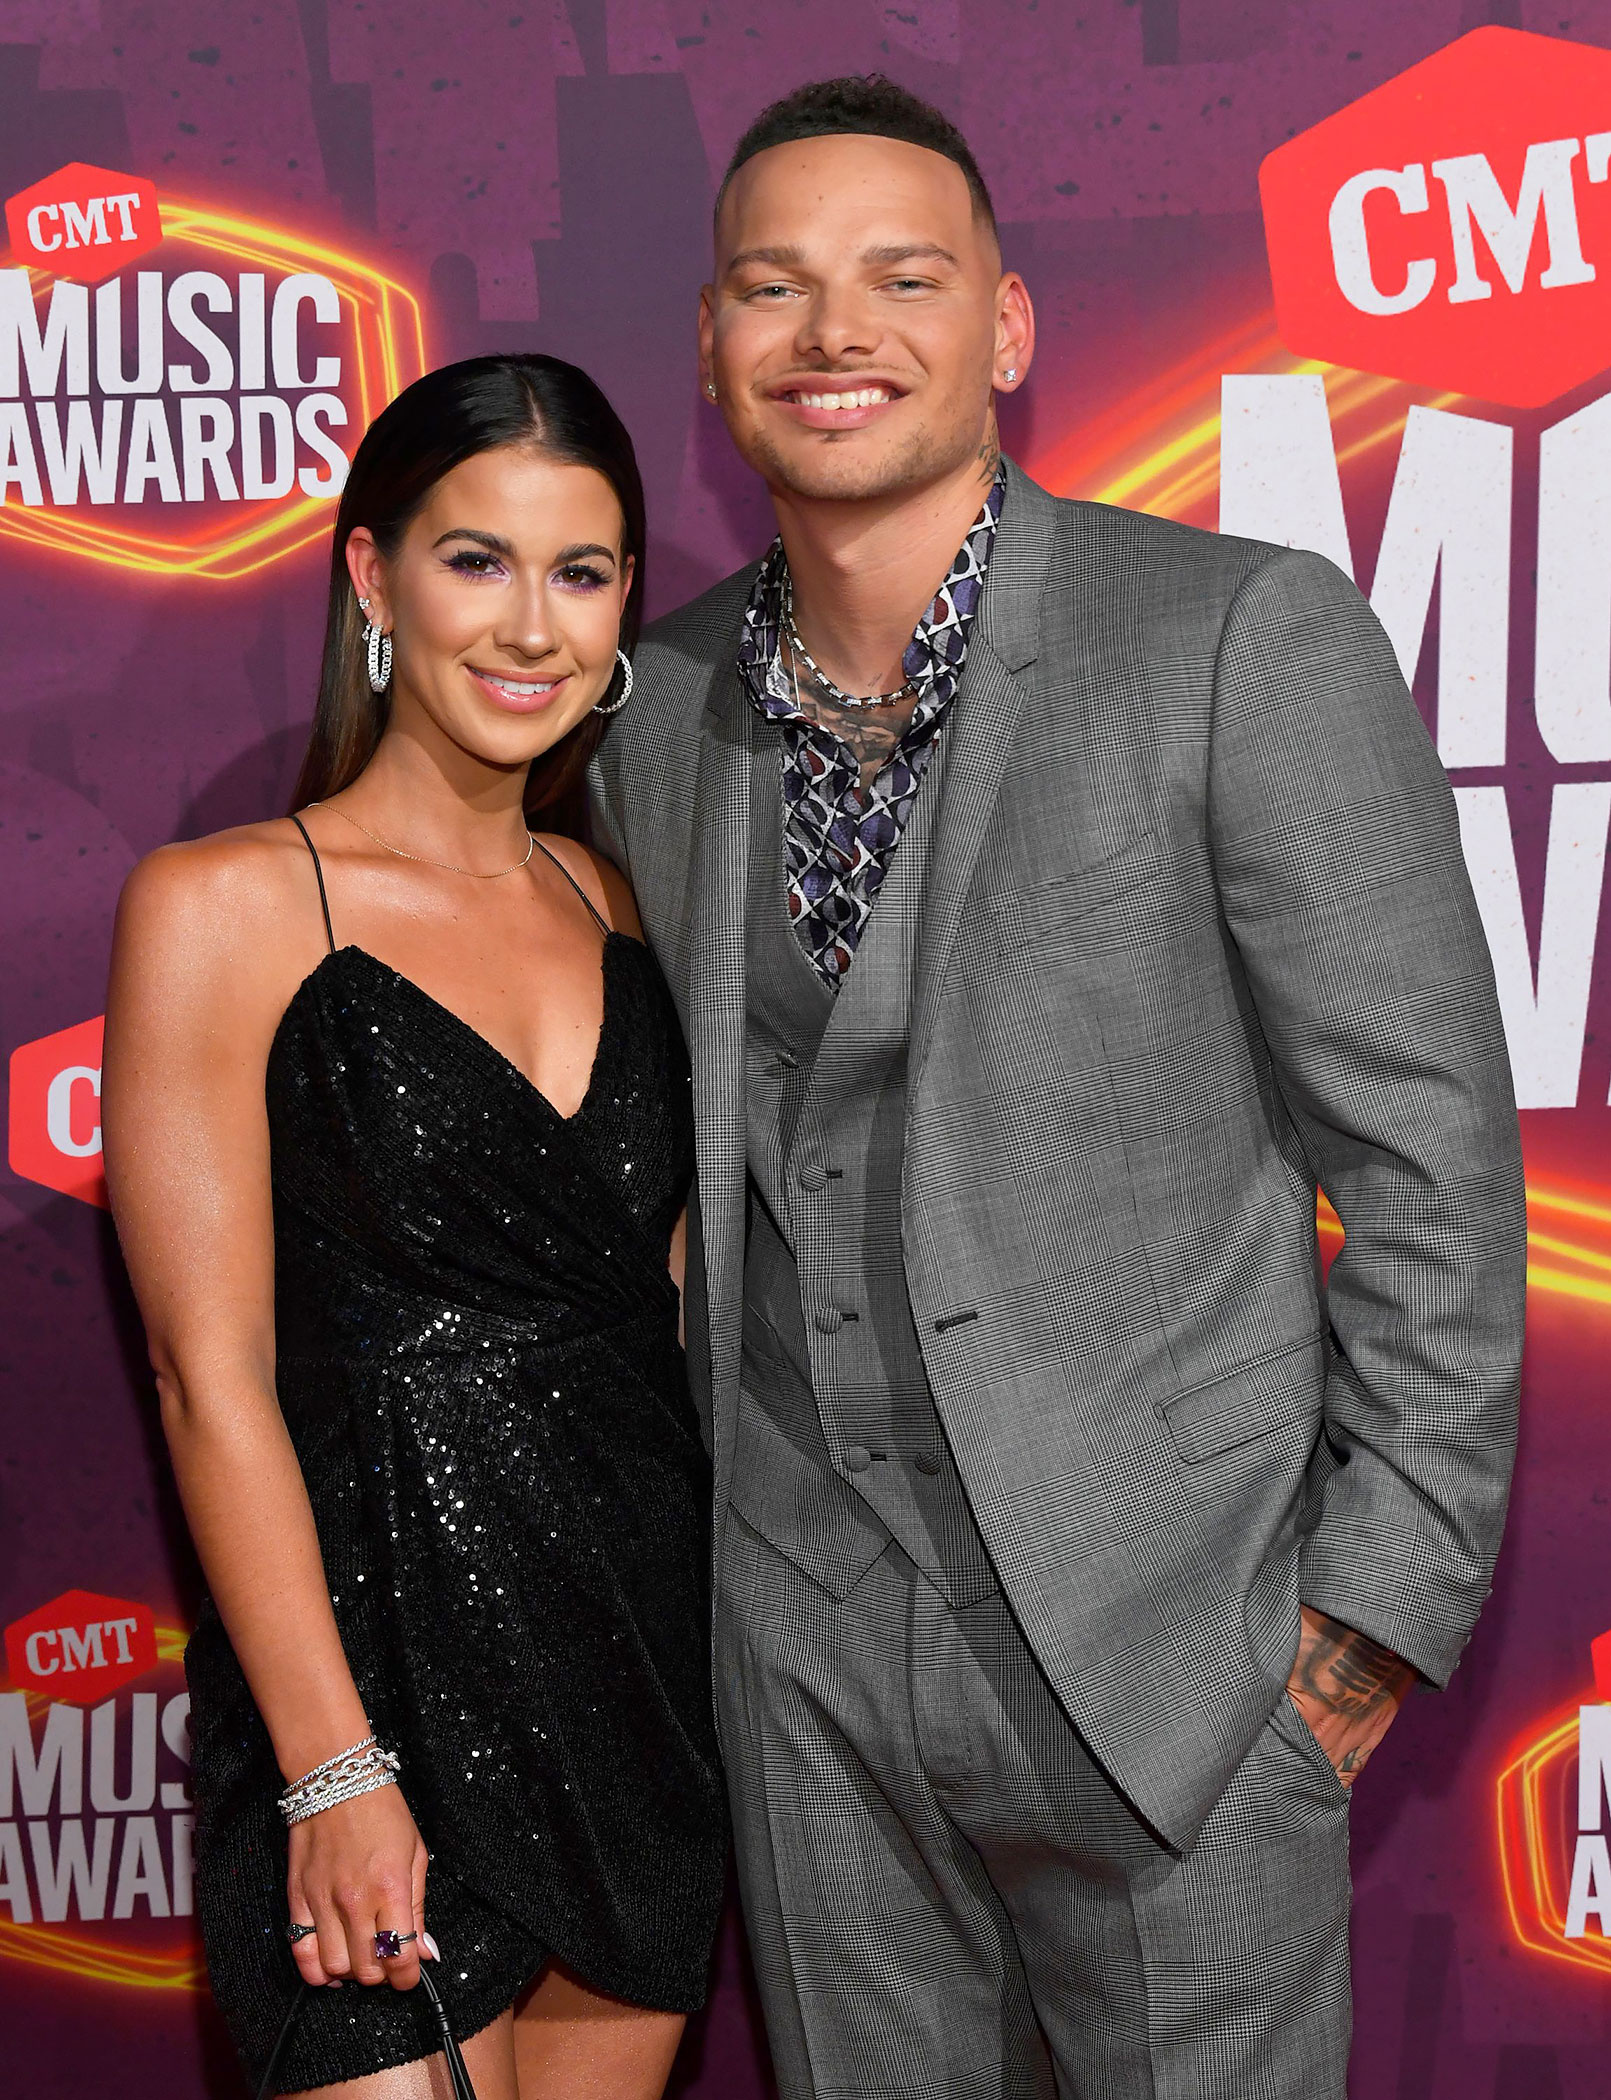 Kane Brown, CMT Music Awards, Hottest country couples, Red carpet glamour, 1620x2100 HD Handy